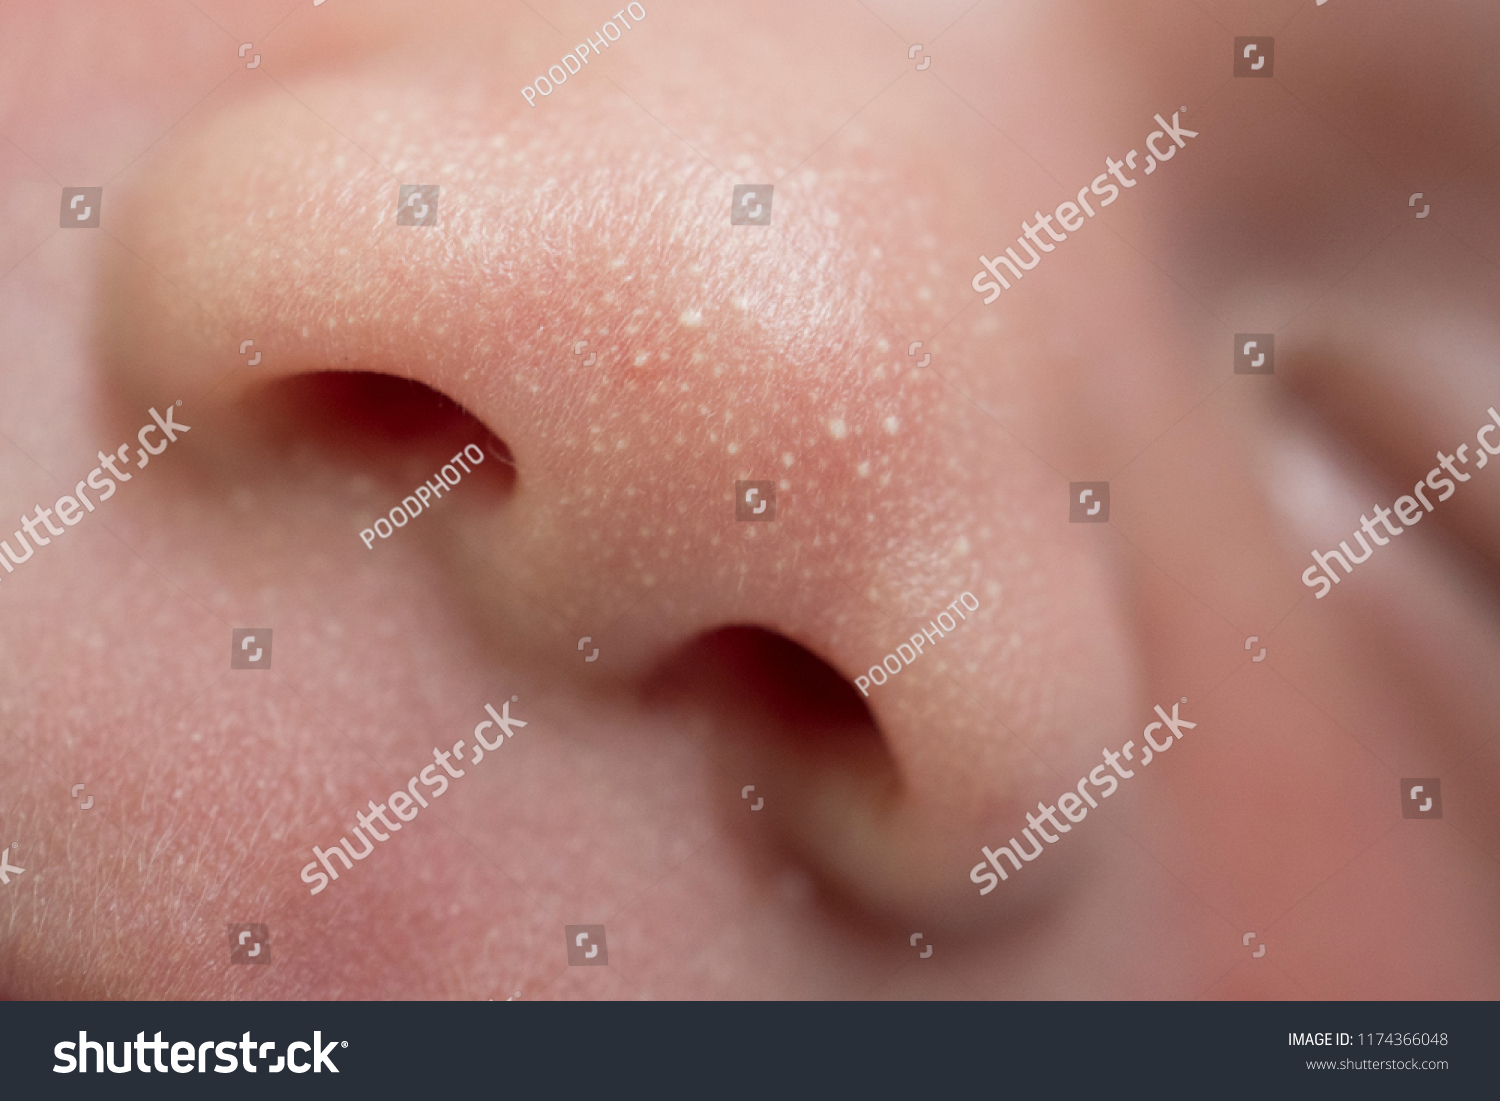 Macro, close-up shot of the milia on a two day old baby cheek
, nose and forehead. #1174366048